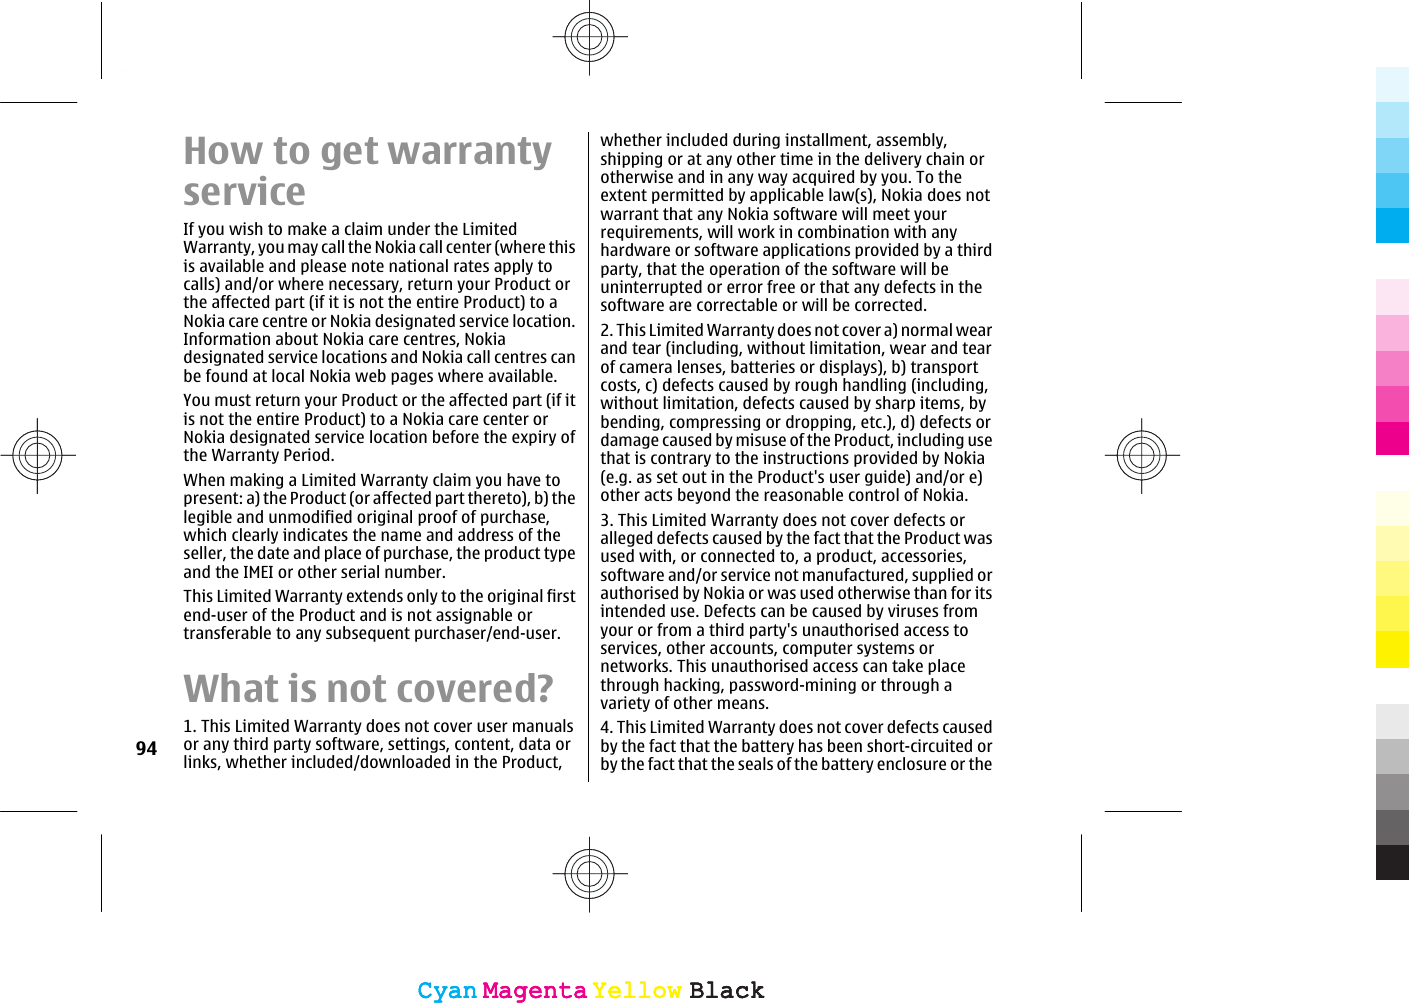 How to get warrantyserviceIf you wish to make a claim under the LimitedWarranty, you may call the Nokia call center (where thisis available and please note national rates apply tocalls) and/or where necessary, return your Product orthe affected part (if it is not the entire Product) to aNokia care centre or Nokia designated service location.Information about Nokia care centres, Nokiadesignated service locations and Nokia call centres canbe found at local Nokia web pages where available.You must return your Product or the affected part (if itis not the entire Product) to a Nokia care center orNokia designated service location before the expiry ofthe Warranty Period.When making a Limited Warranty claim you have topresent: a) the Product (or affected part thereto), b) thelegible and unmodified original proof of purchase,which clearly indicates the name and address of theseller, the date and place of purchase, the product typeand the IMEI or other serial number.This Limited Warranty extends only to the original firstend-user of the Product and is not assignable ortransferable to any subsequent purchaser/end-user.What is not covered?1. This Limited Warranty does not cover user manualsor any third party software, settings, content, data orlinks, whether included/downloaded in the Product,whether included during installment, assembly,shipping or at any other time in the delivery chain orotherwise and in any way acquired by you. To theextent permitted by applicable law(s), Nokia does notwarrant that any Nokia software will meet yourrequirements, will work in combination with anyhardware or software applications provided by a thirdparty, that the operation of the software will beuninterrupted or error free or that any defects in thesoftware are correctable or will be corrected.2. This Limited Warranty does not cover a) normal wearand tear (including, without limitation, wear and tearof camera lenses, batteries or displays), b) transportcosts, c) defects caused by rough handling (including,without limitation, defects caused by sharp items, bybending, compressing or dropping, etc.), d) defects ordamage caused by misuse of the Product, including usethat is contrary to the instructions provided by Nokia(e.g. as set out in the Product&apos;s user guide) and/or e)other acts beyond the reasonable control of Nokia.3. This Limited Warranty does not cover defects oralleged defects caused by the fact that the Product wasused with, or connected to, a product, accessories,software and/or service not manufactured, supplied orauthorised by Nokia or was used otherwise than for itsintended use. Defects can be caused by viruses fromyour or from a third party&apos;s unauthorised access toservices, other accounts, computer systems ornetworks. This unauthorised access can take placethrough hacking, password-mining or through avariety of other means.4. This Limited Warranty does not cover defects causedby the fact that the battery has been short-circuited orby the fact that the seals of the battery enclosure or the94CyanCyanMagentaMagentaYellowYellowBlackBlackCyanCyanMagentaMagentaYellowYellowBlackBlack